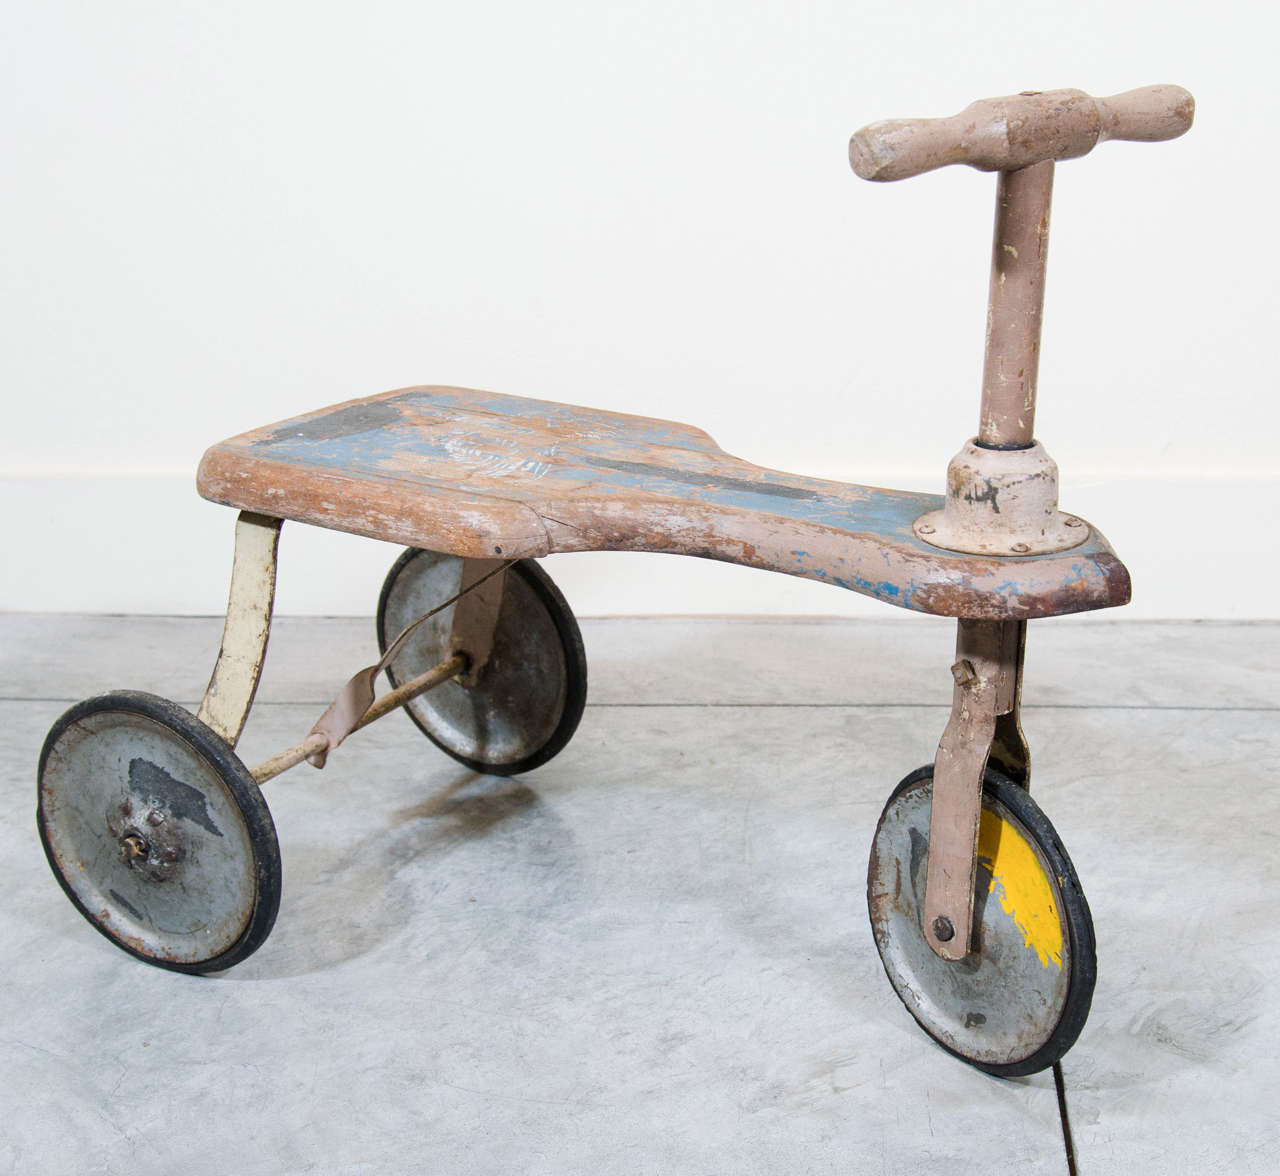 An adorable early American child's wooden scooter with original rubber tires and traces of paint, USA, circa 1920s.
M176.